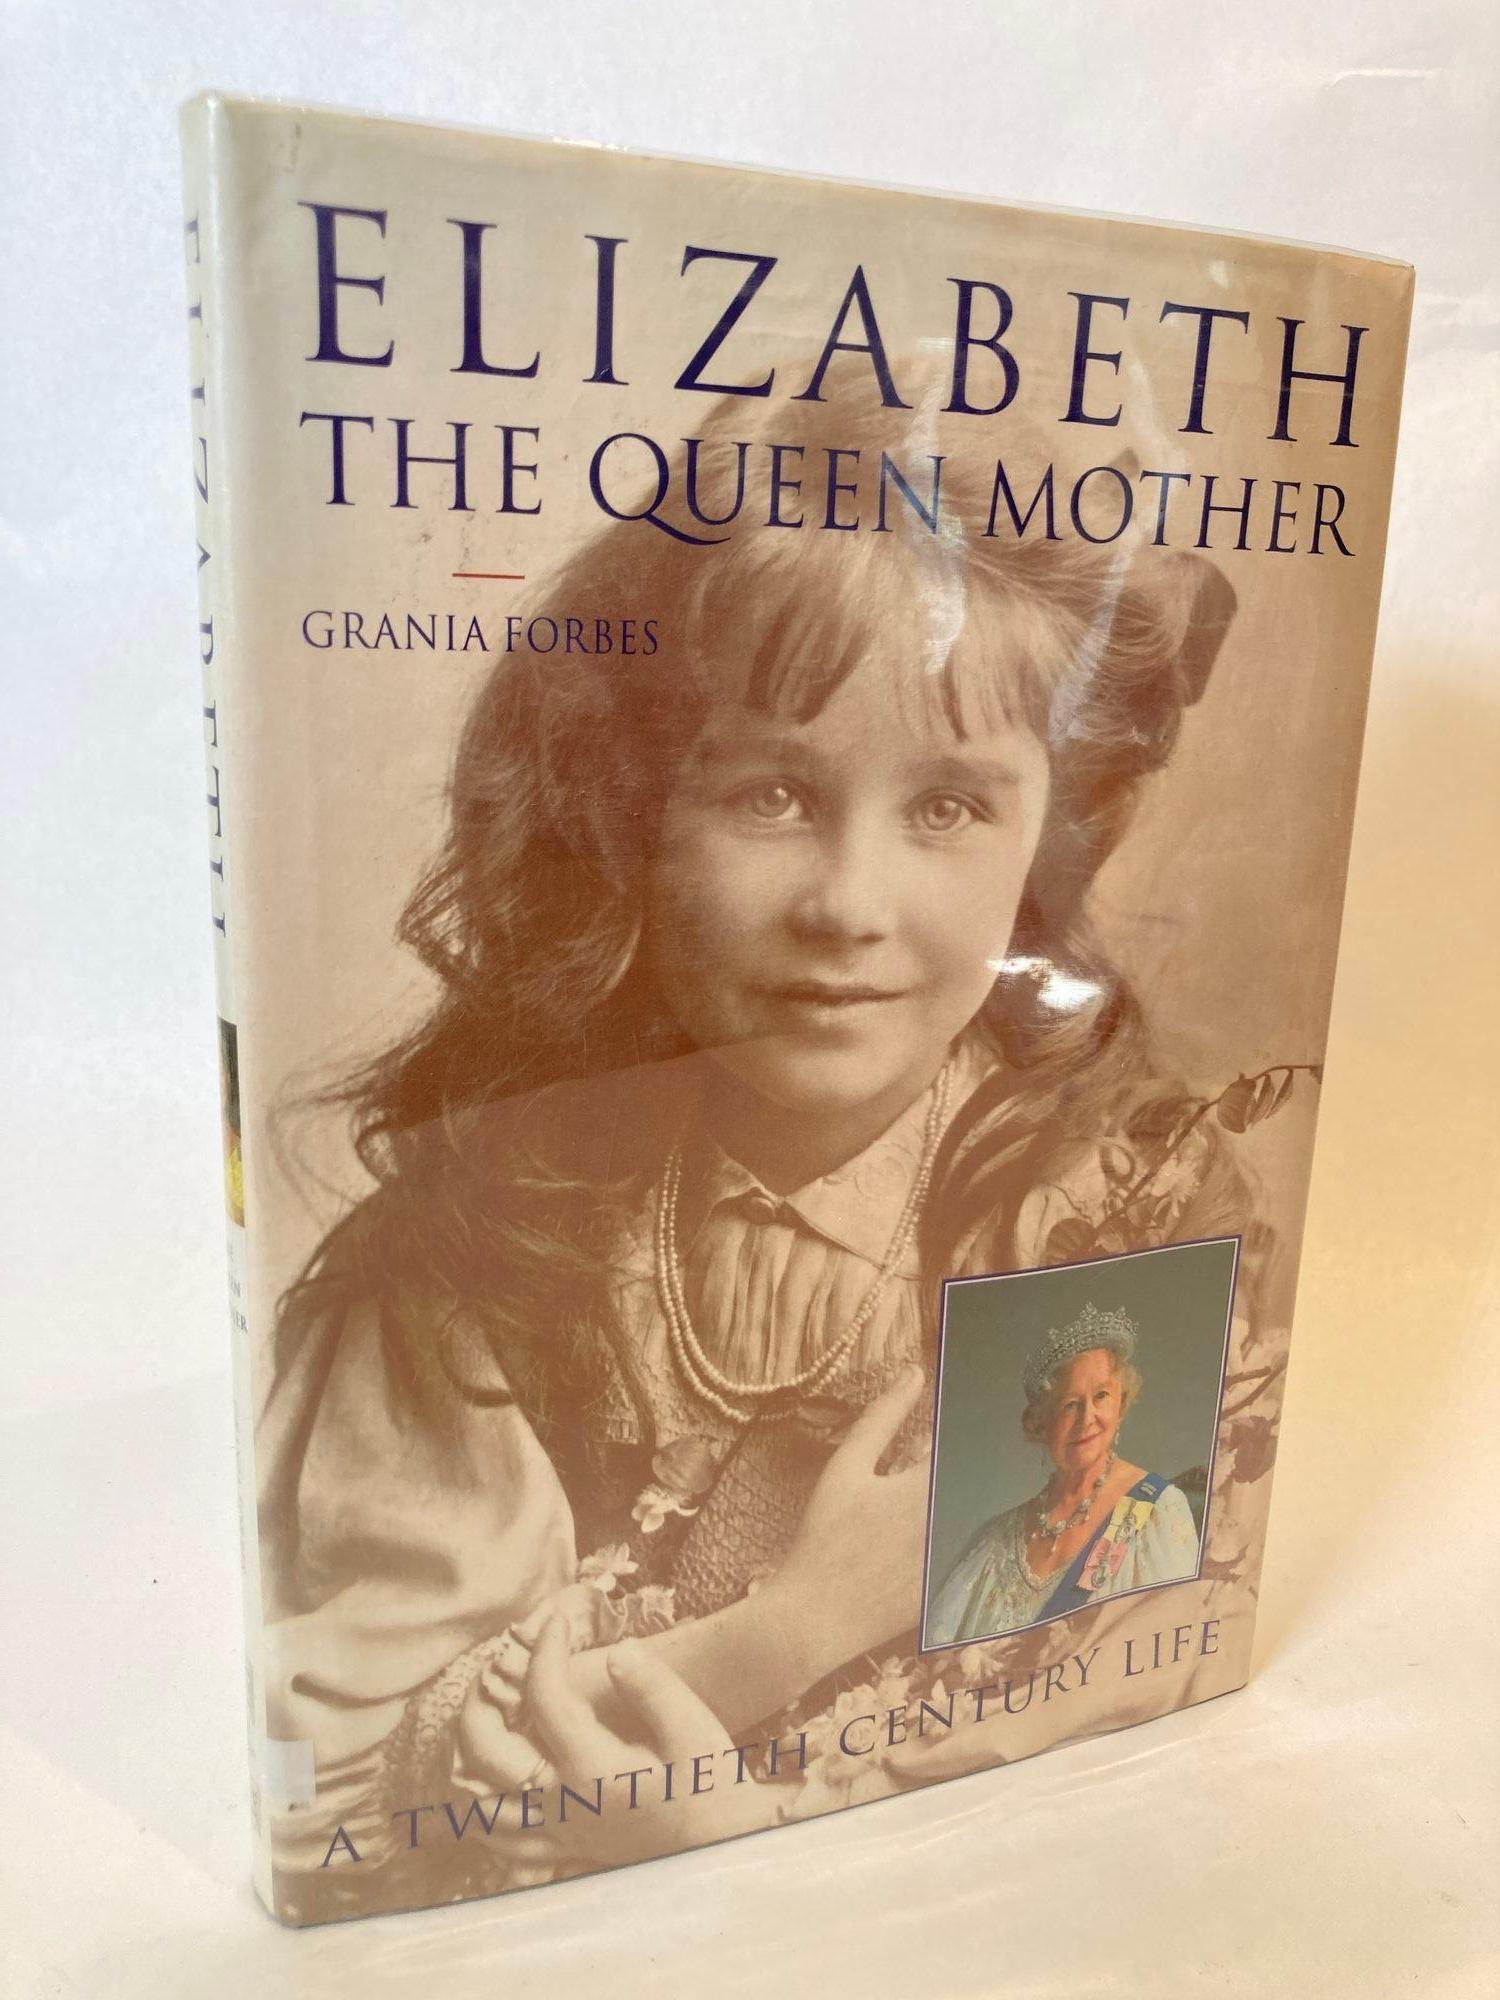 Victorian Elizabeth the Queen Mother : a Twentieth Century Life by Grania Forbes Hardcover For Sale